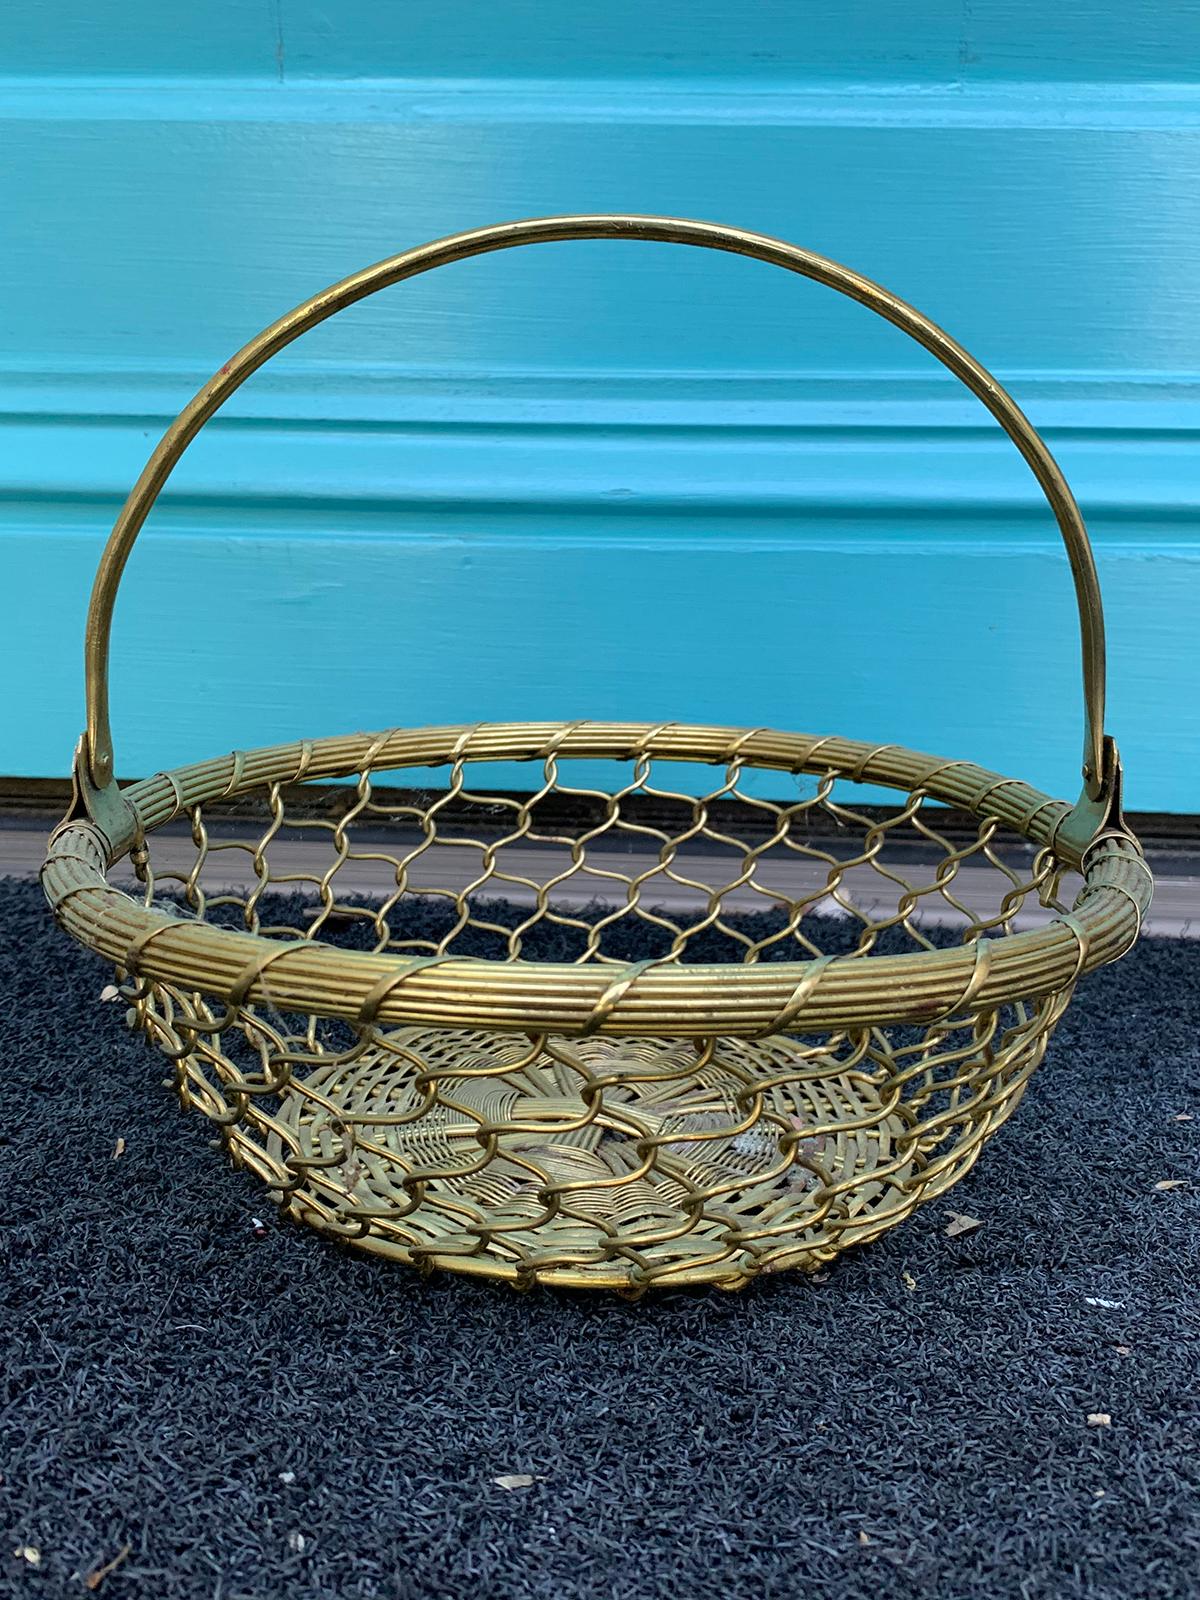 20th century round woven basket with handle
Measures: 8.25